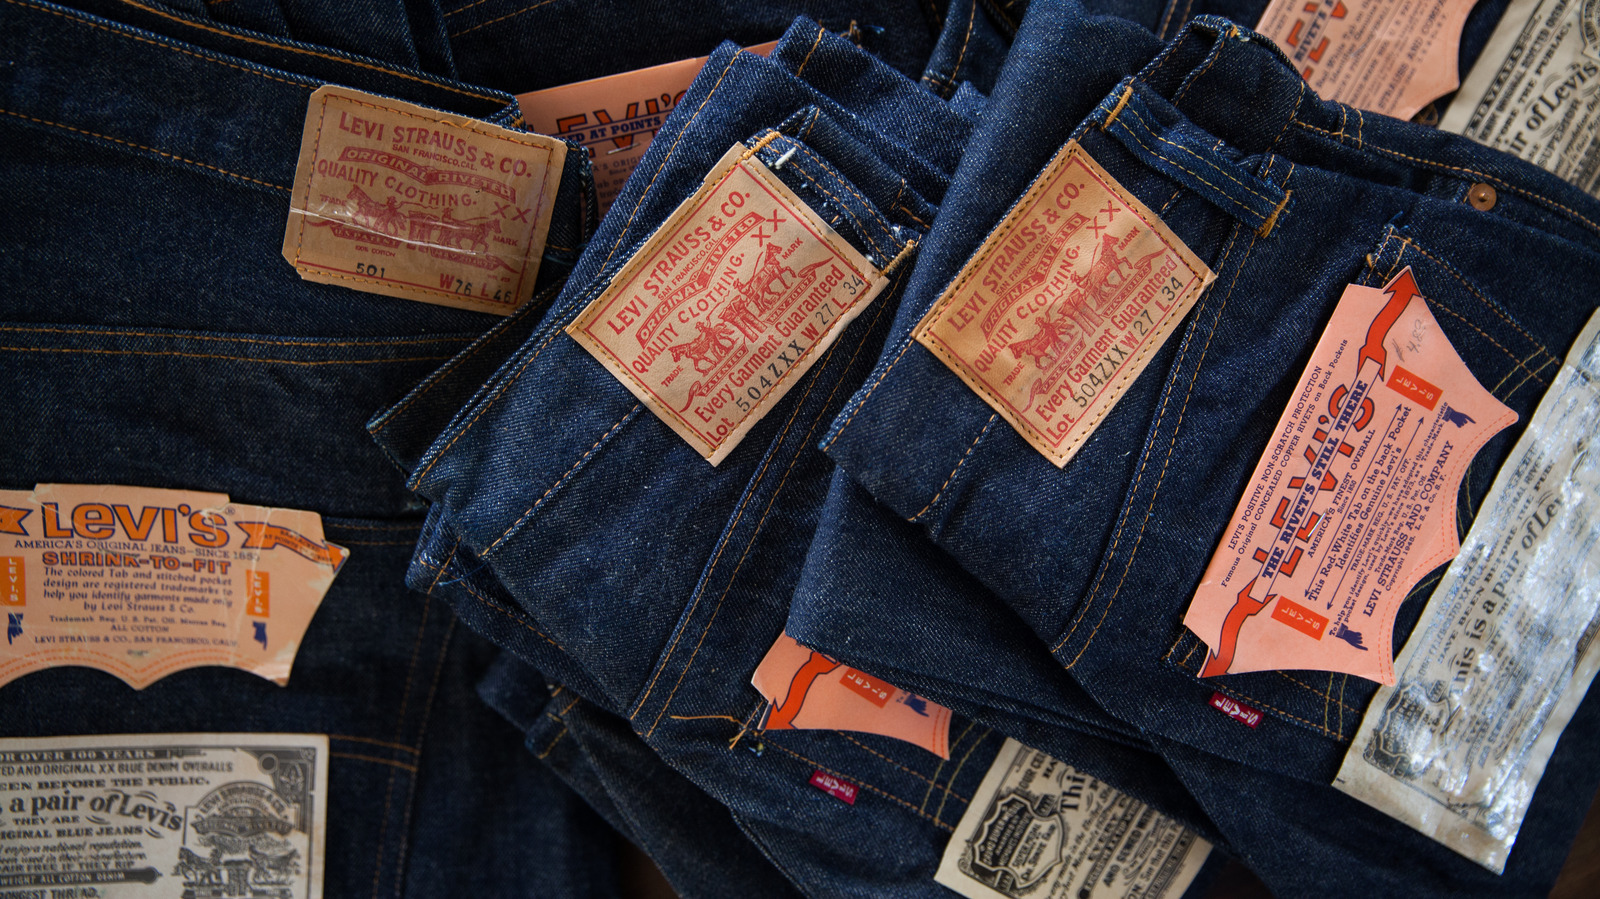 How The California Gold Led To Levi's Jeans